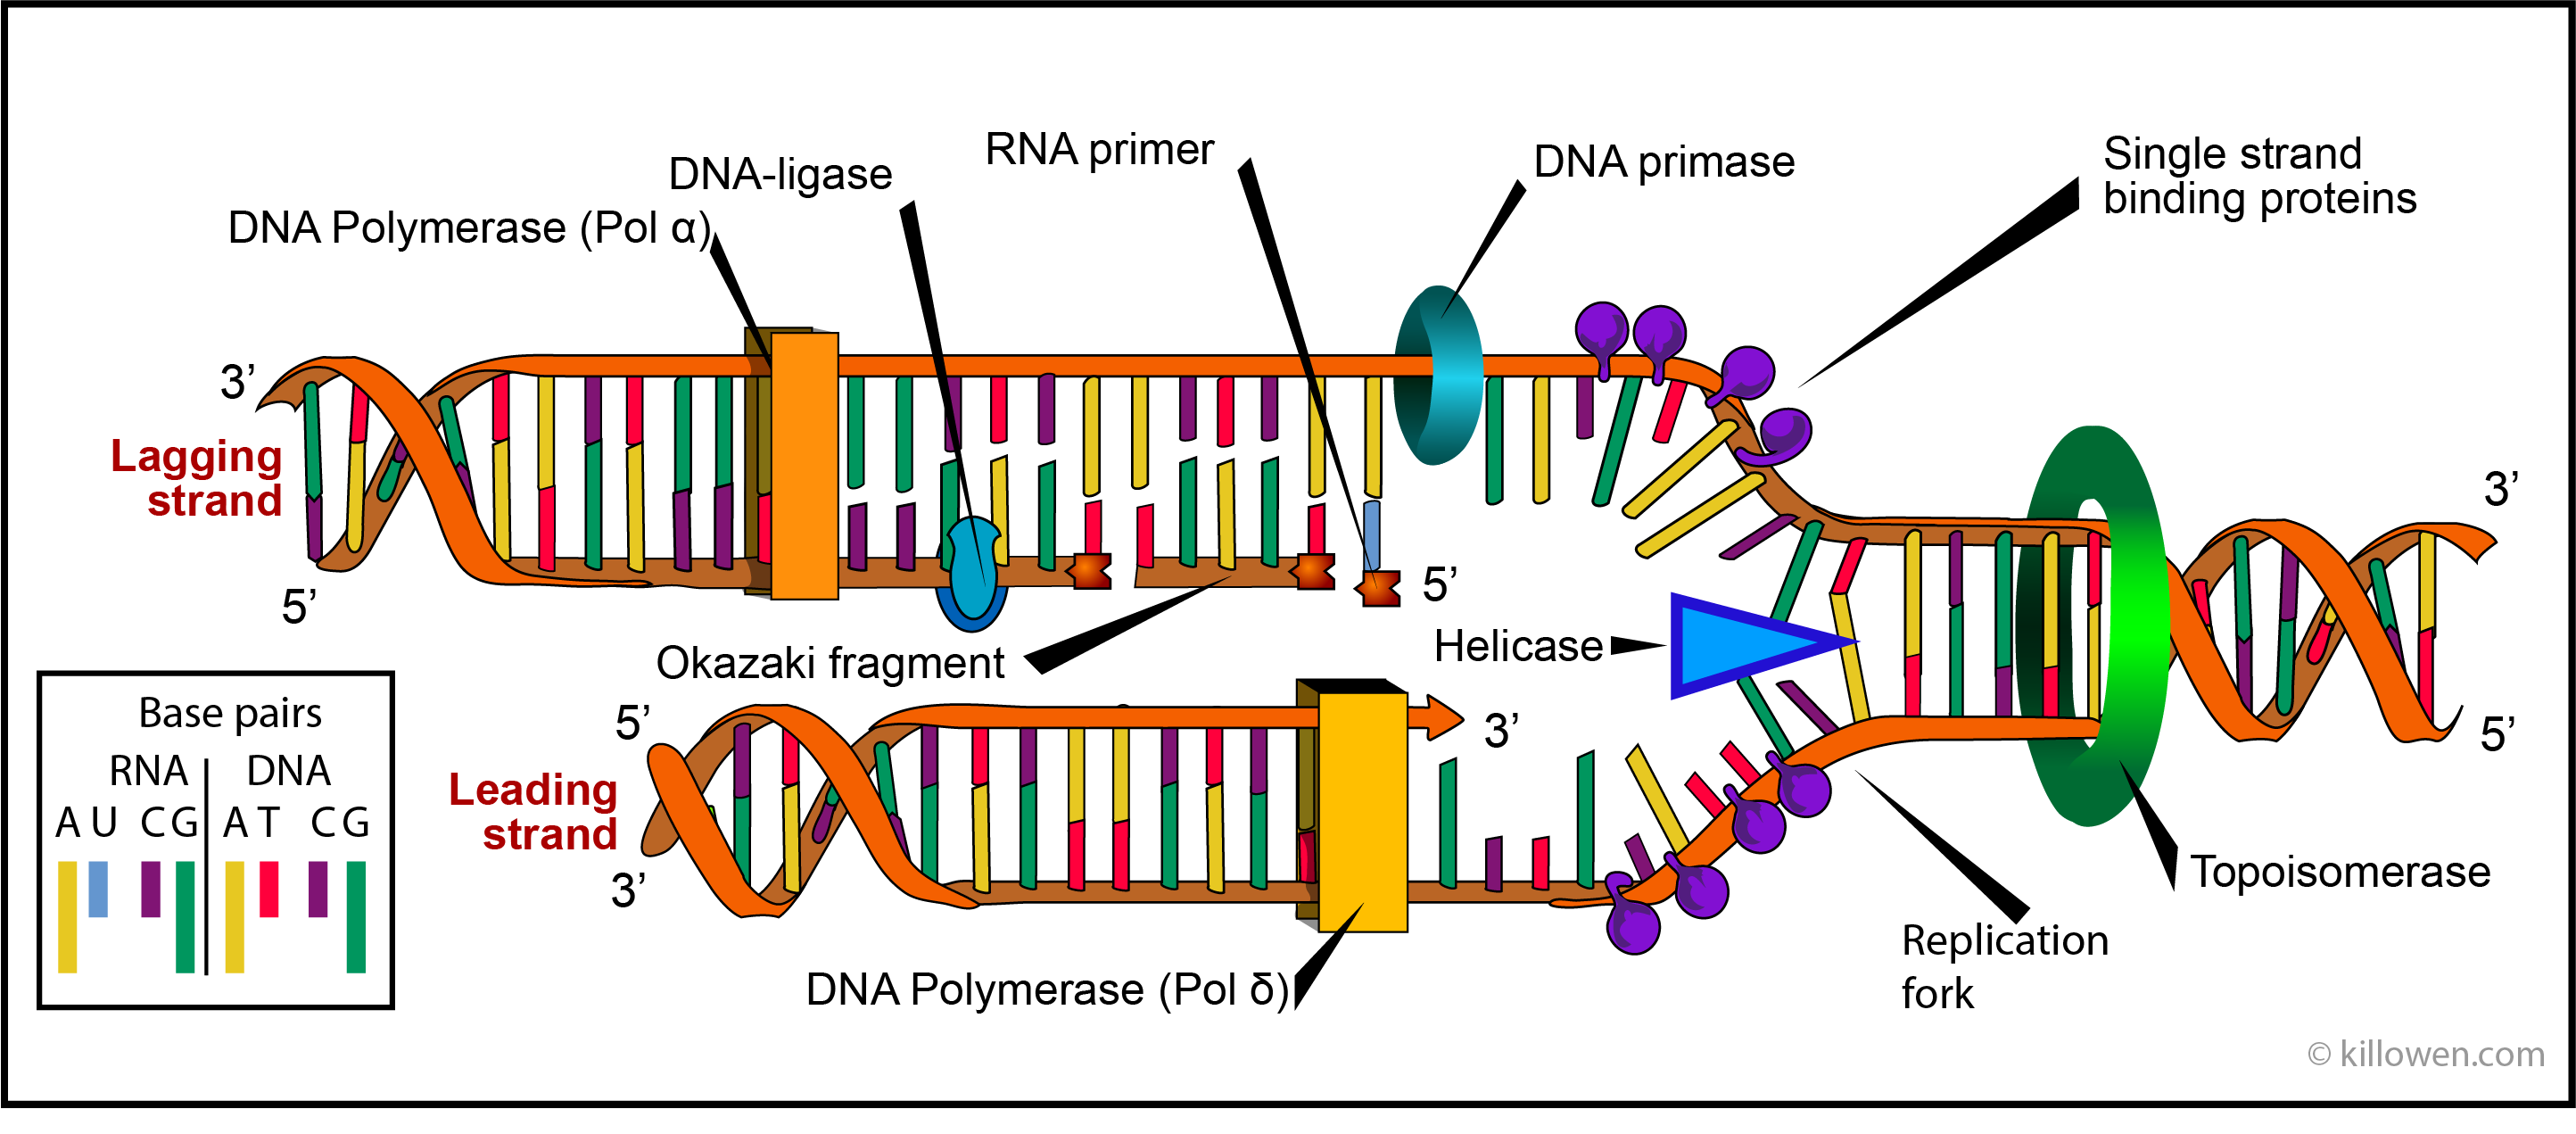 dna-replication-topoisomerase-function